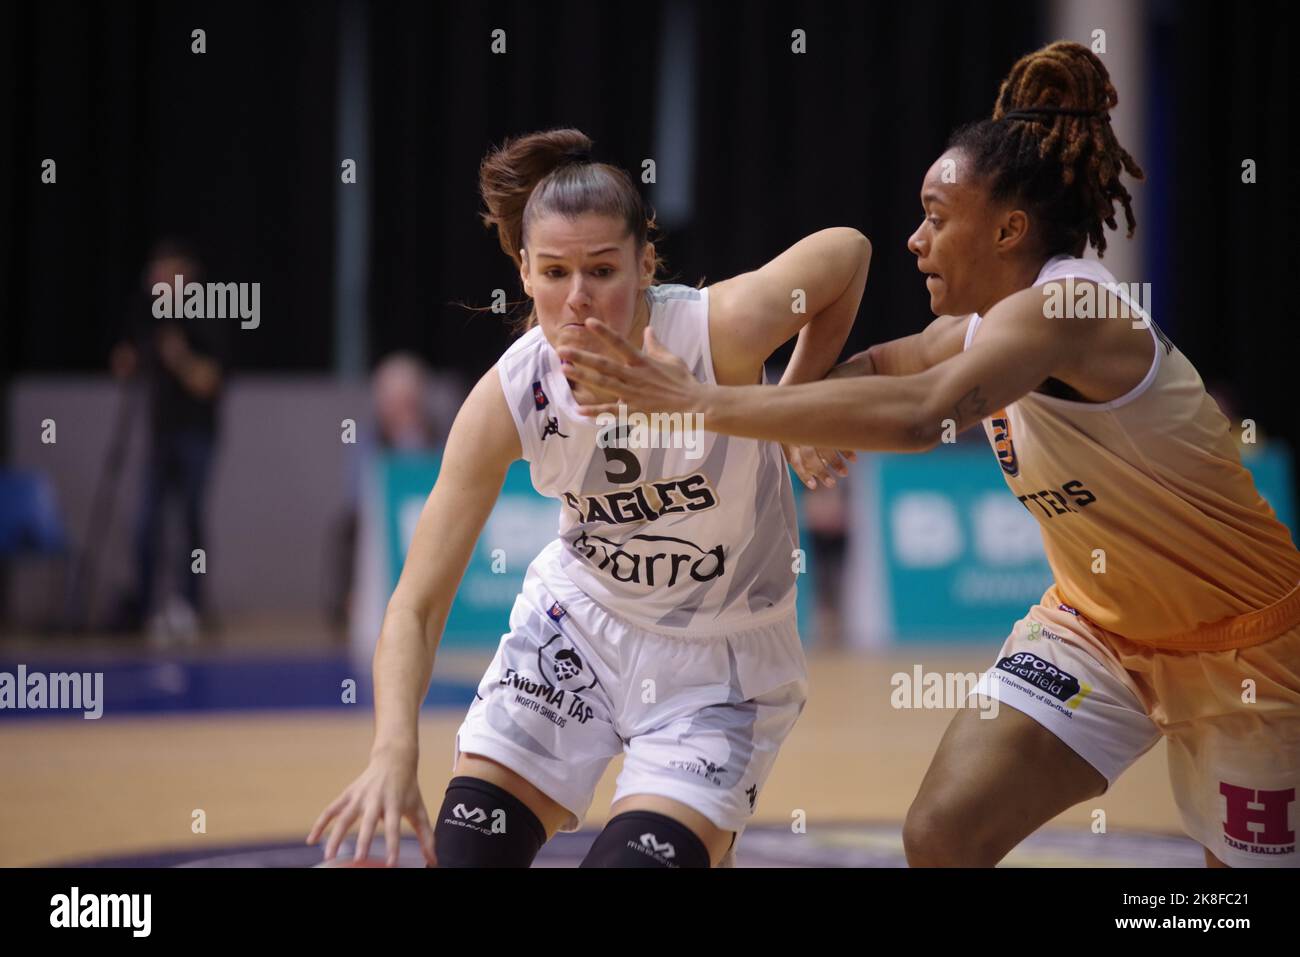 Sheffield, England, 23 October 2022. Marina Fernandez Pardo playing for Newcastle Eagles against Sheffield Hatters in a WBBL match at Ponds Forge. Credit: Colin Edwards/Alamy Live News. Stock Photo